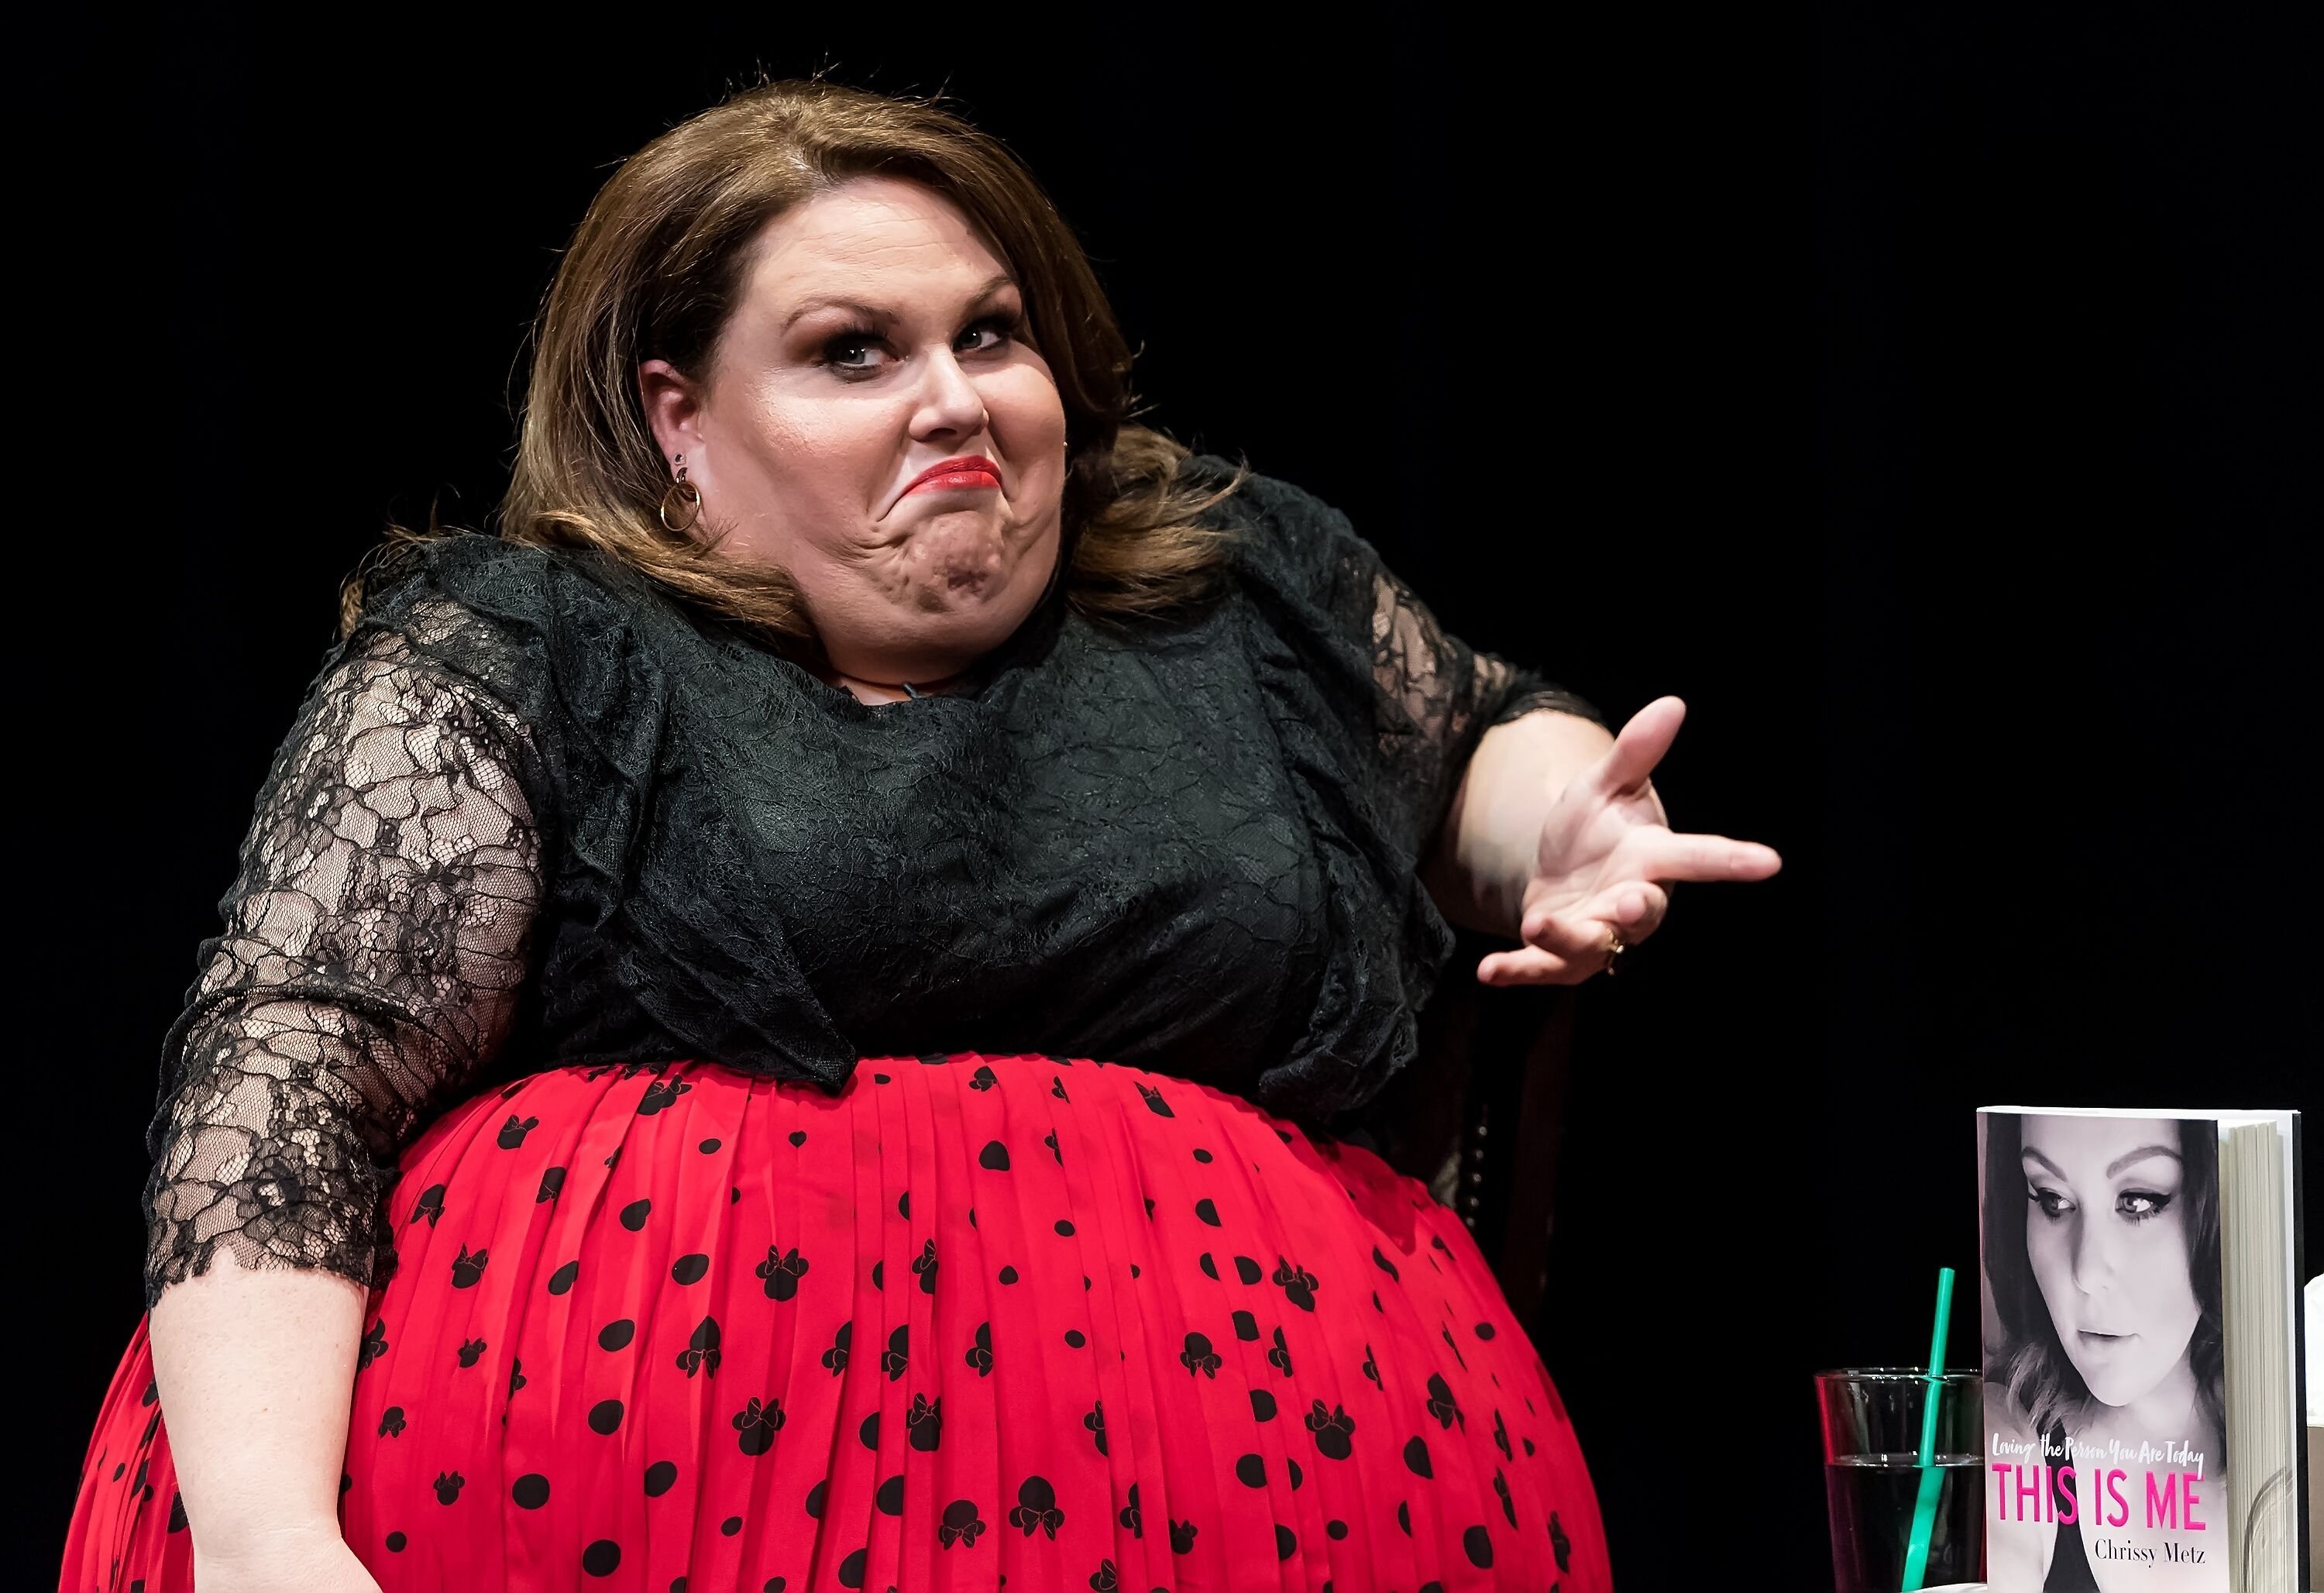 Chrissy Metz attends "This Is Me" book tour. | Source: Getty Images